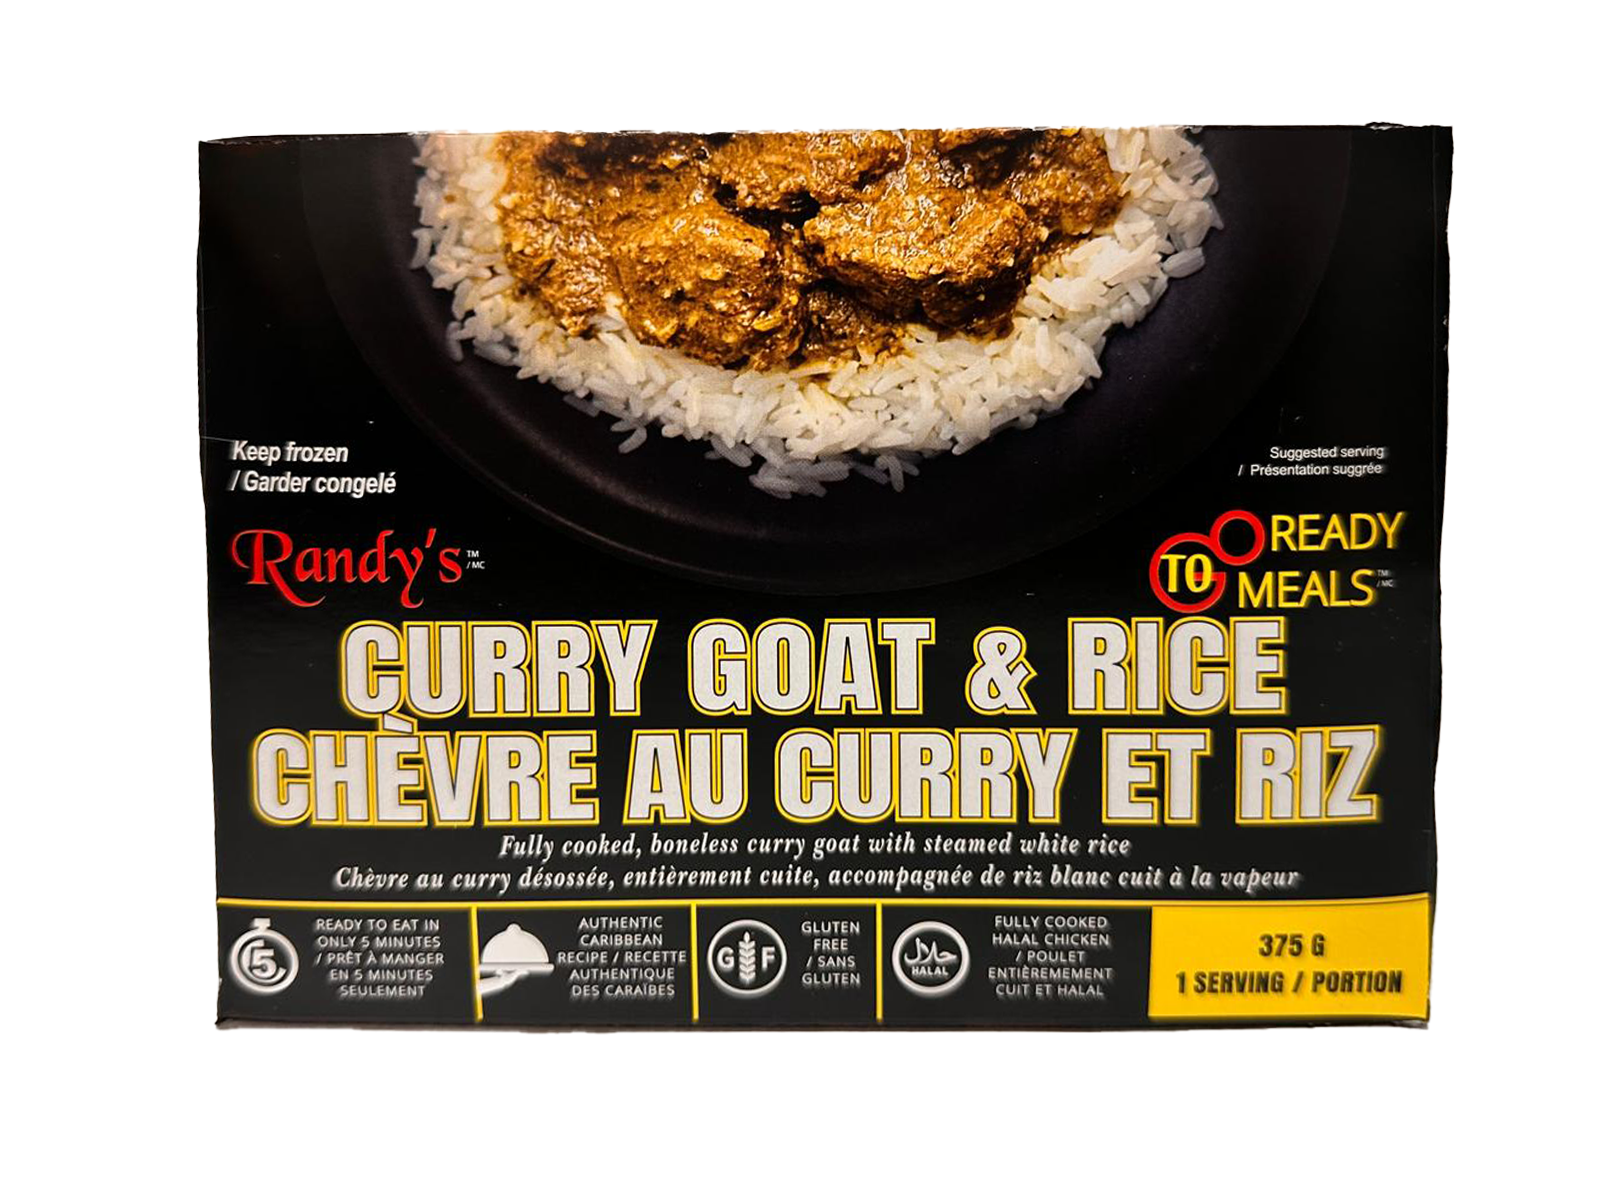 CurryGoat&Rice_Package